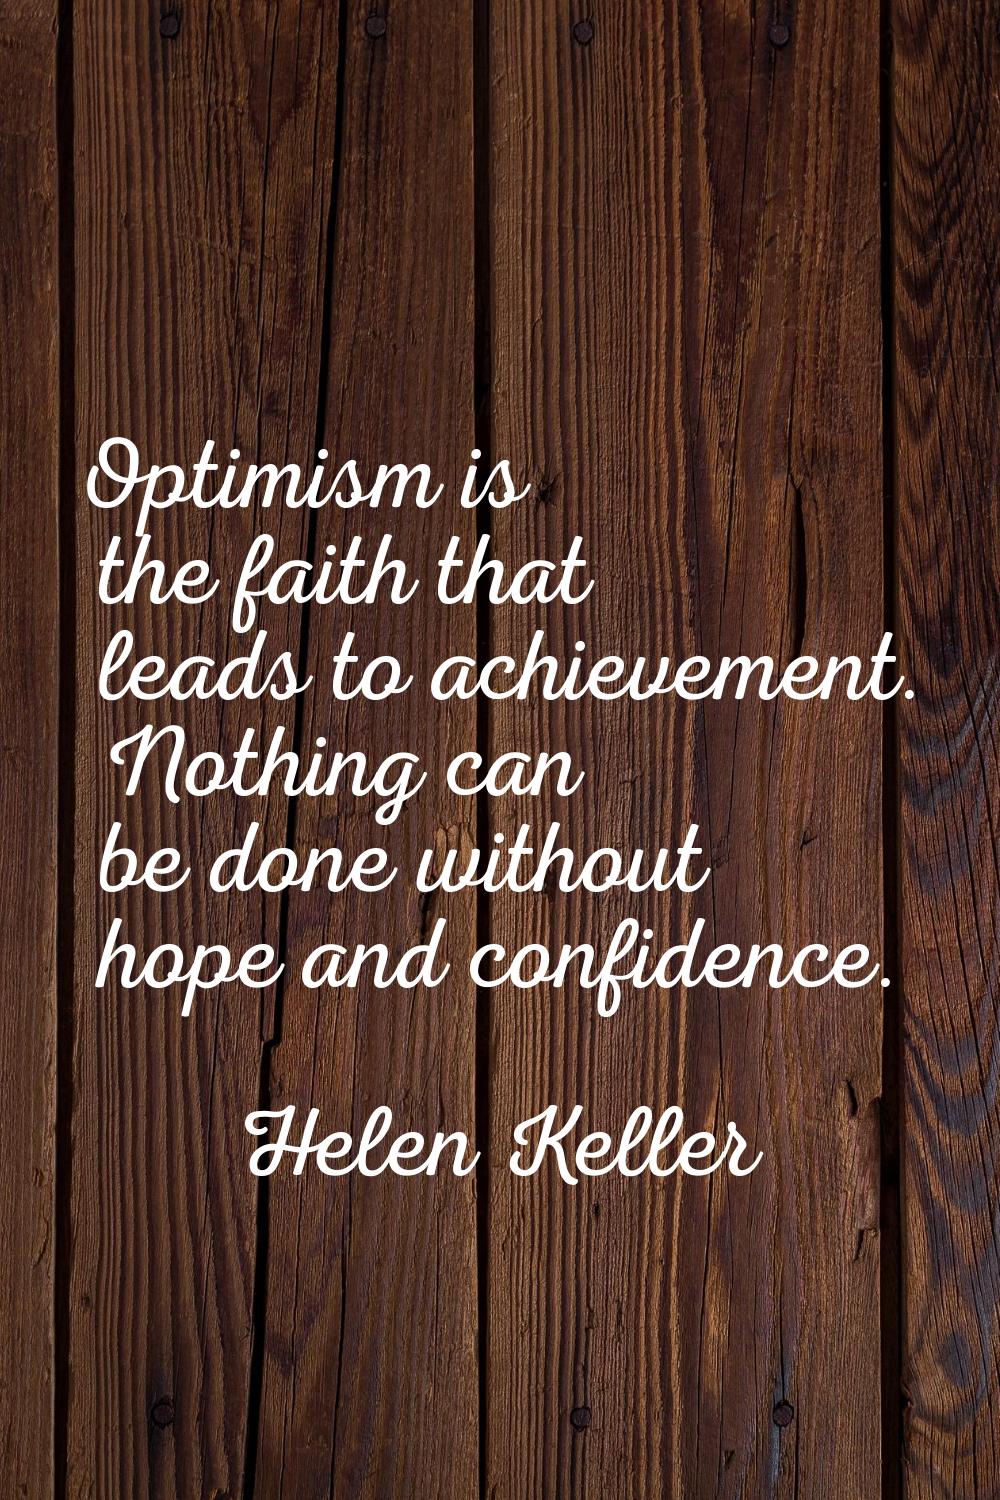 Optimism is the faith that leads to achievement. Nothing can be done without hope and confidence.